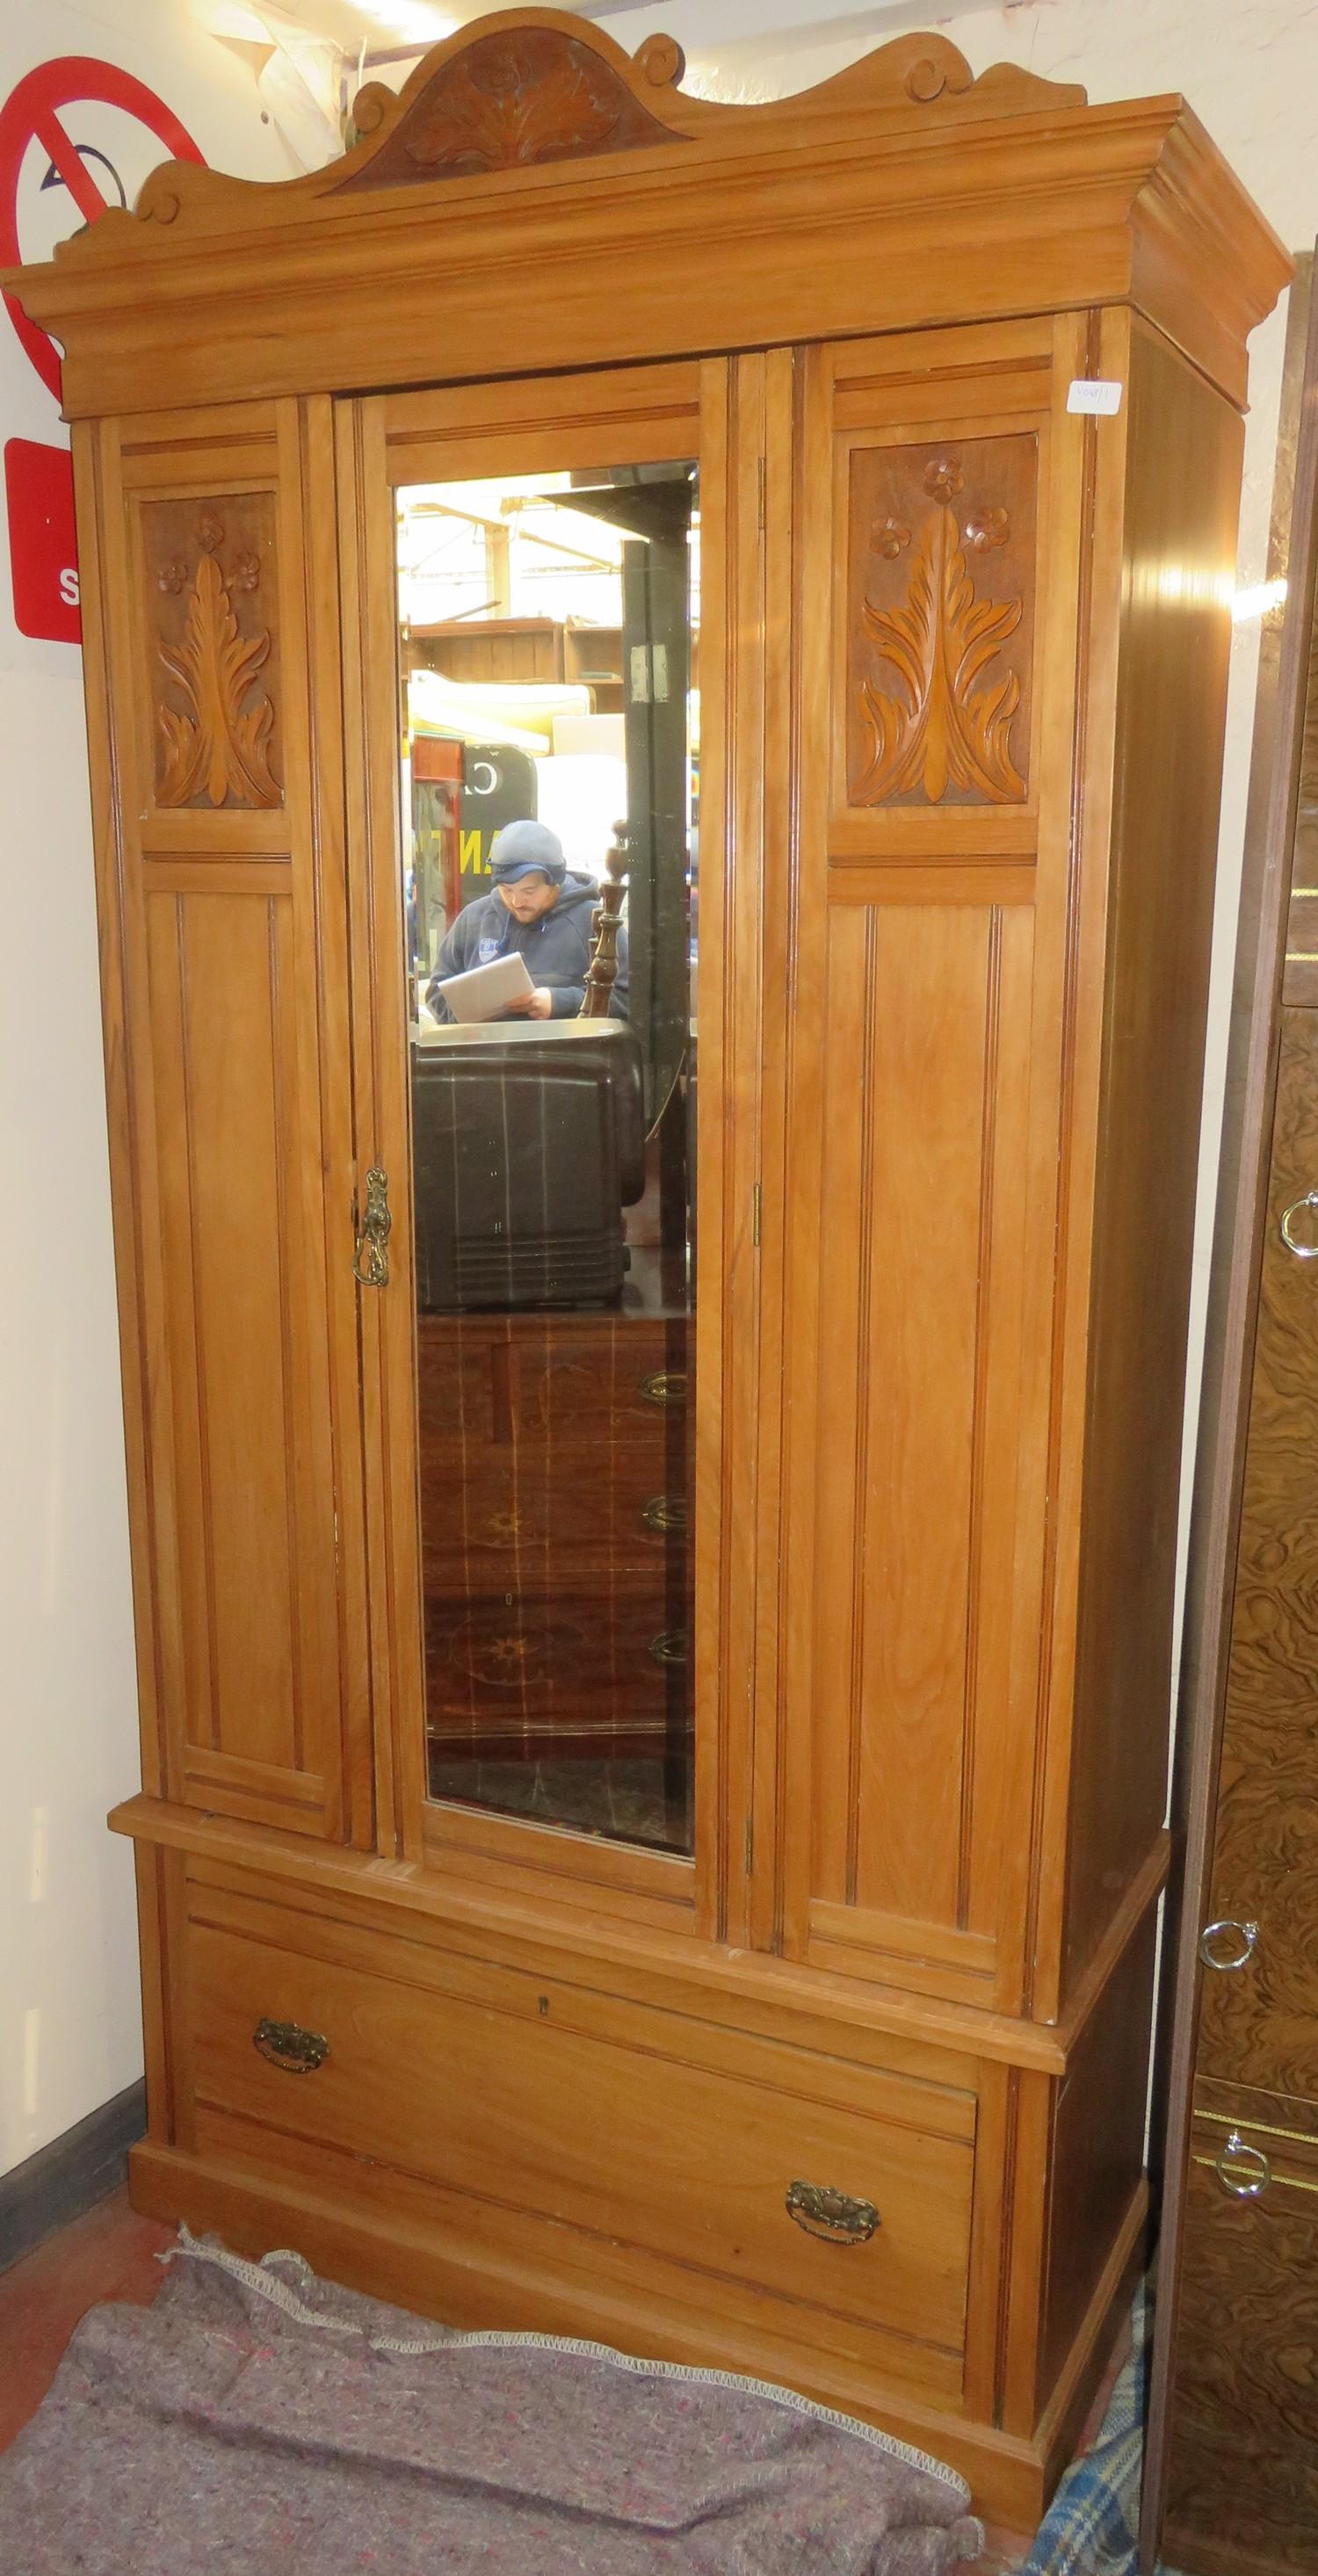 Carved fronted single door mirrored wardrobe. Approx. 207cm H x 106cm W x 46cm D